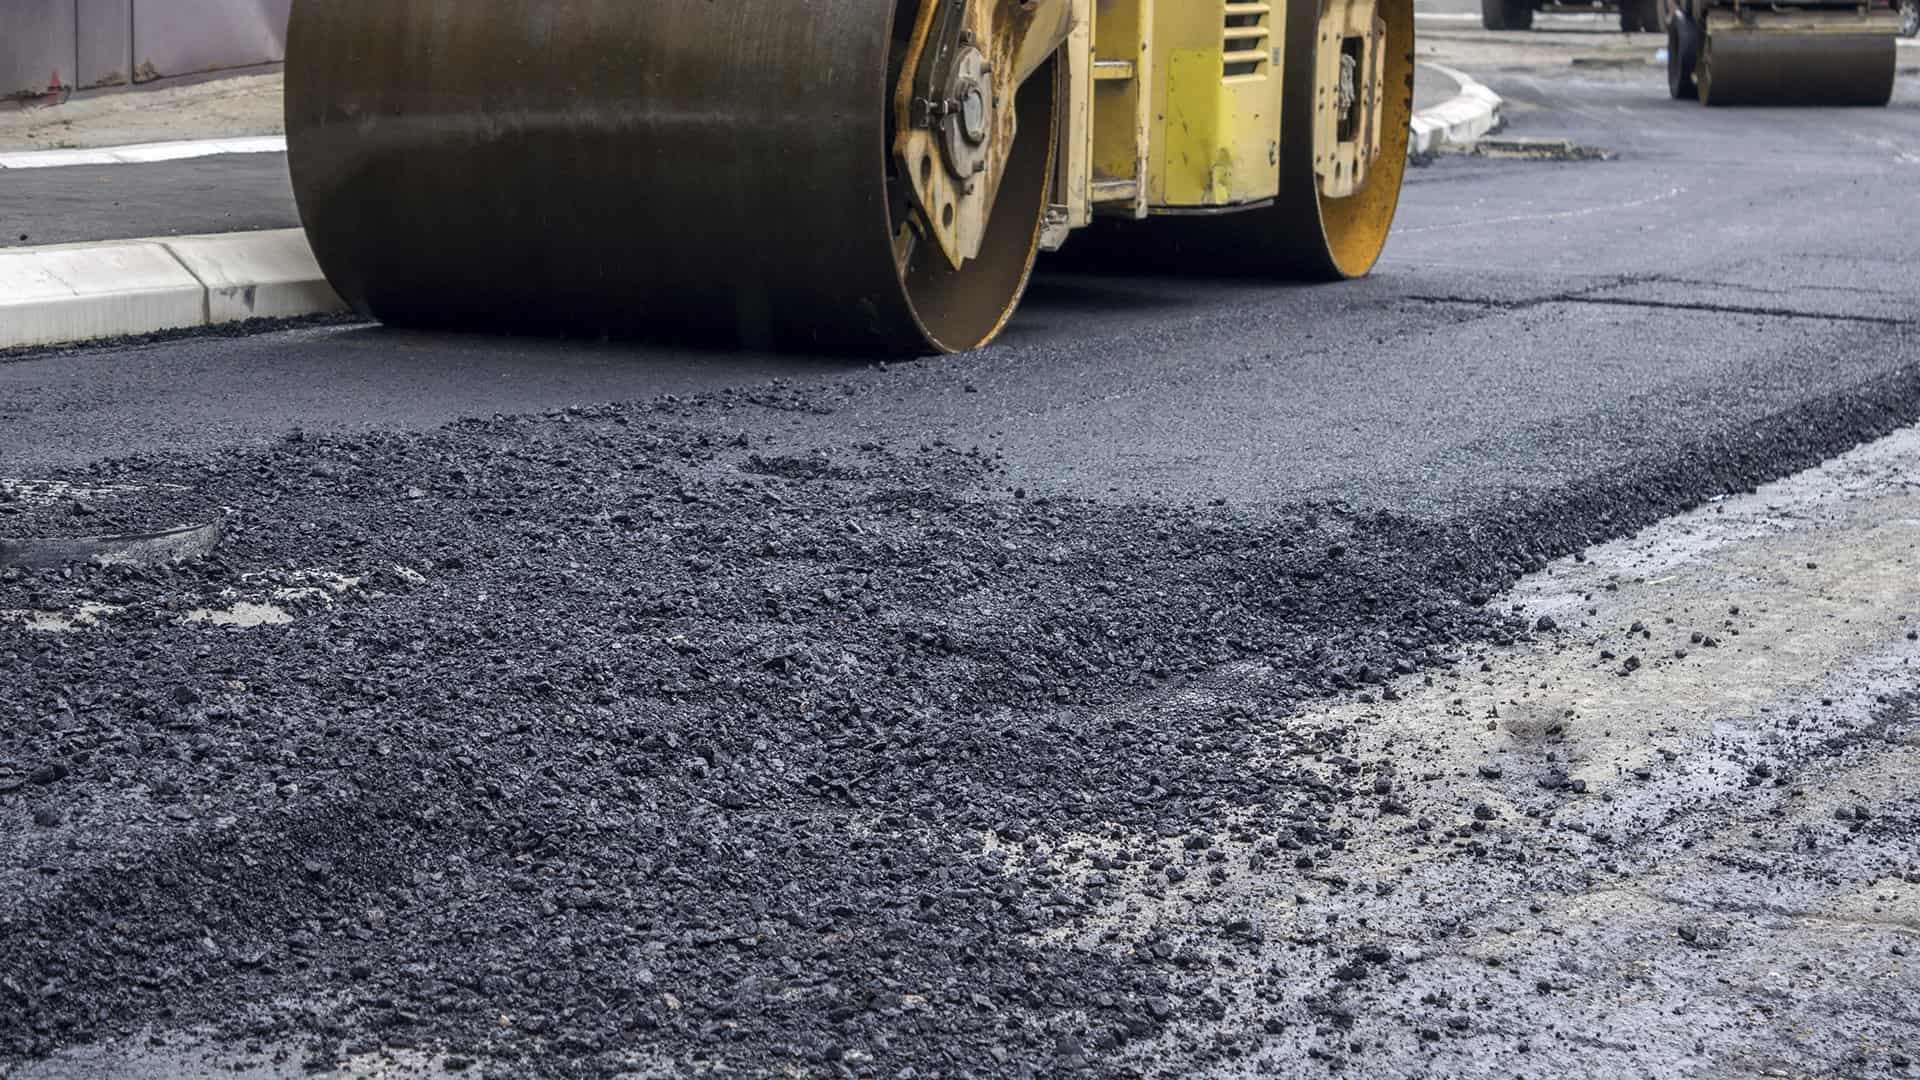 Asphalt Paving and Patching